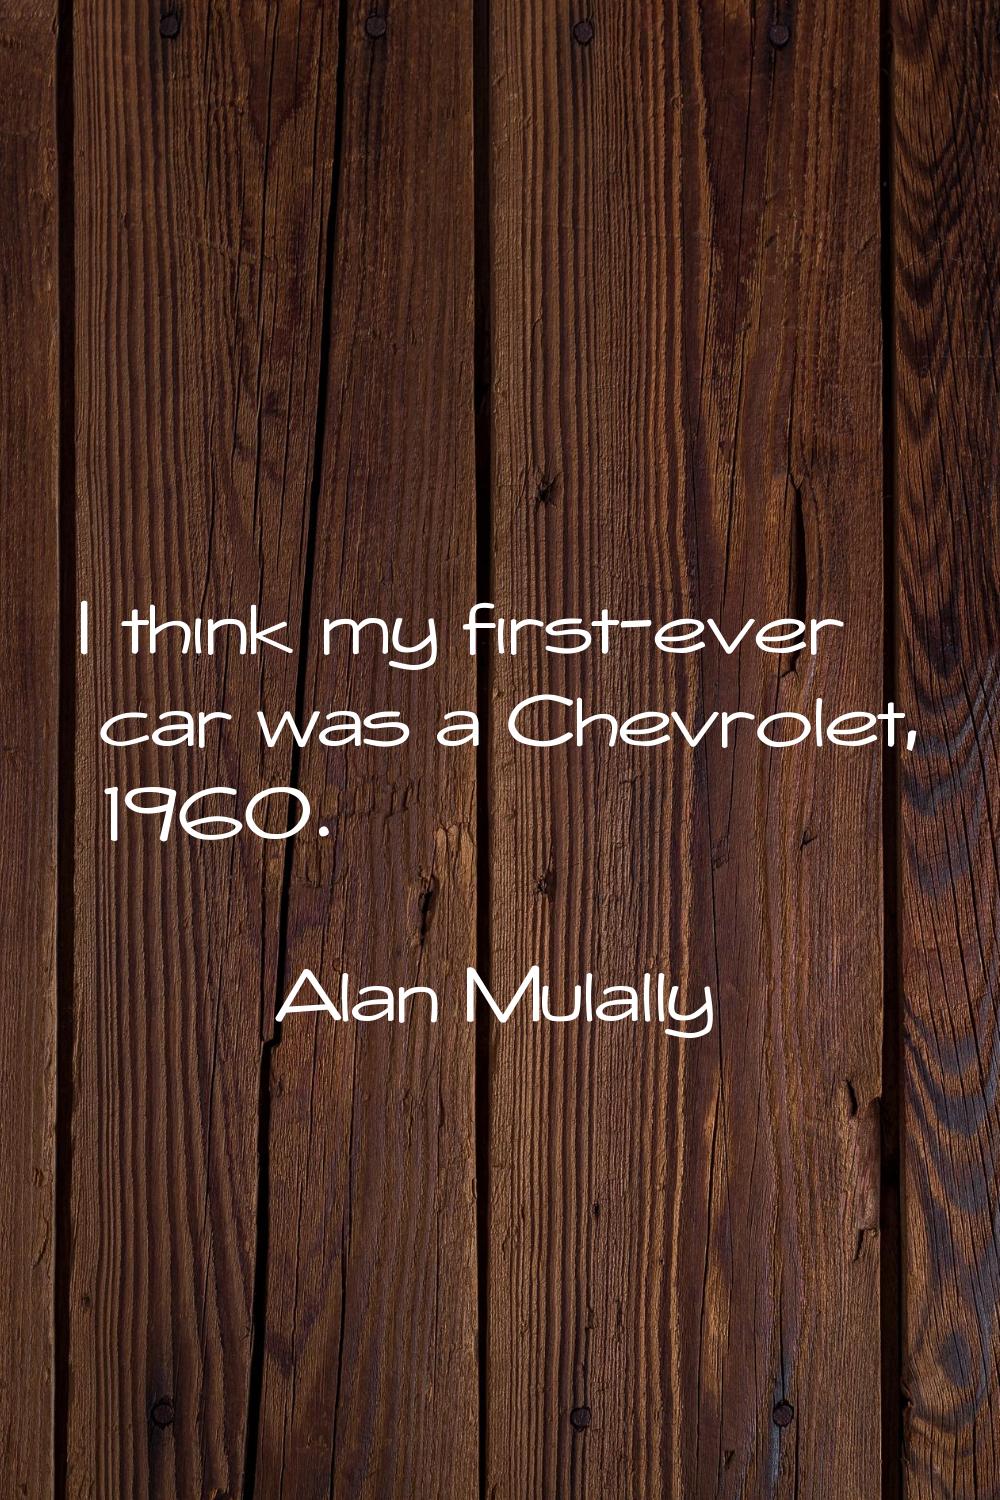 I think my first-ever car was a Chevrolet, 1960.